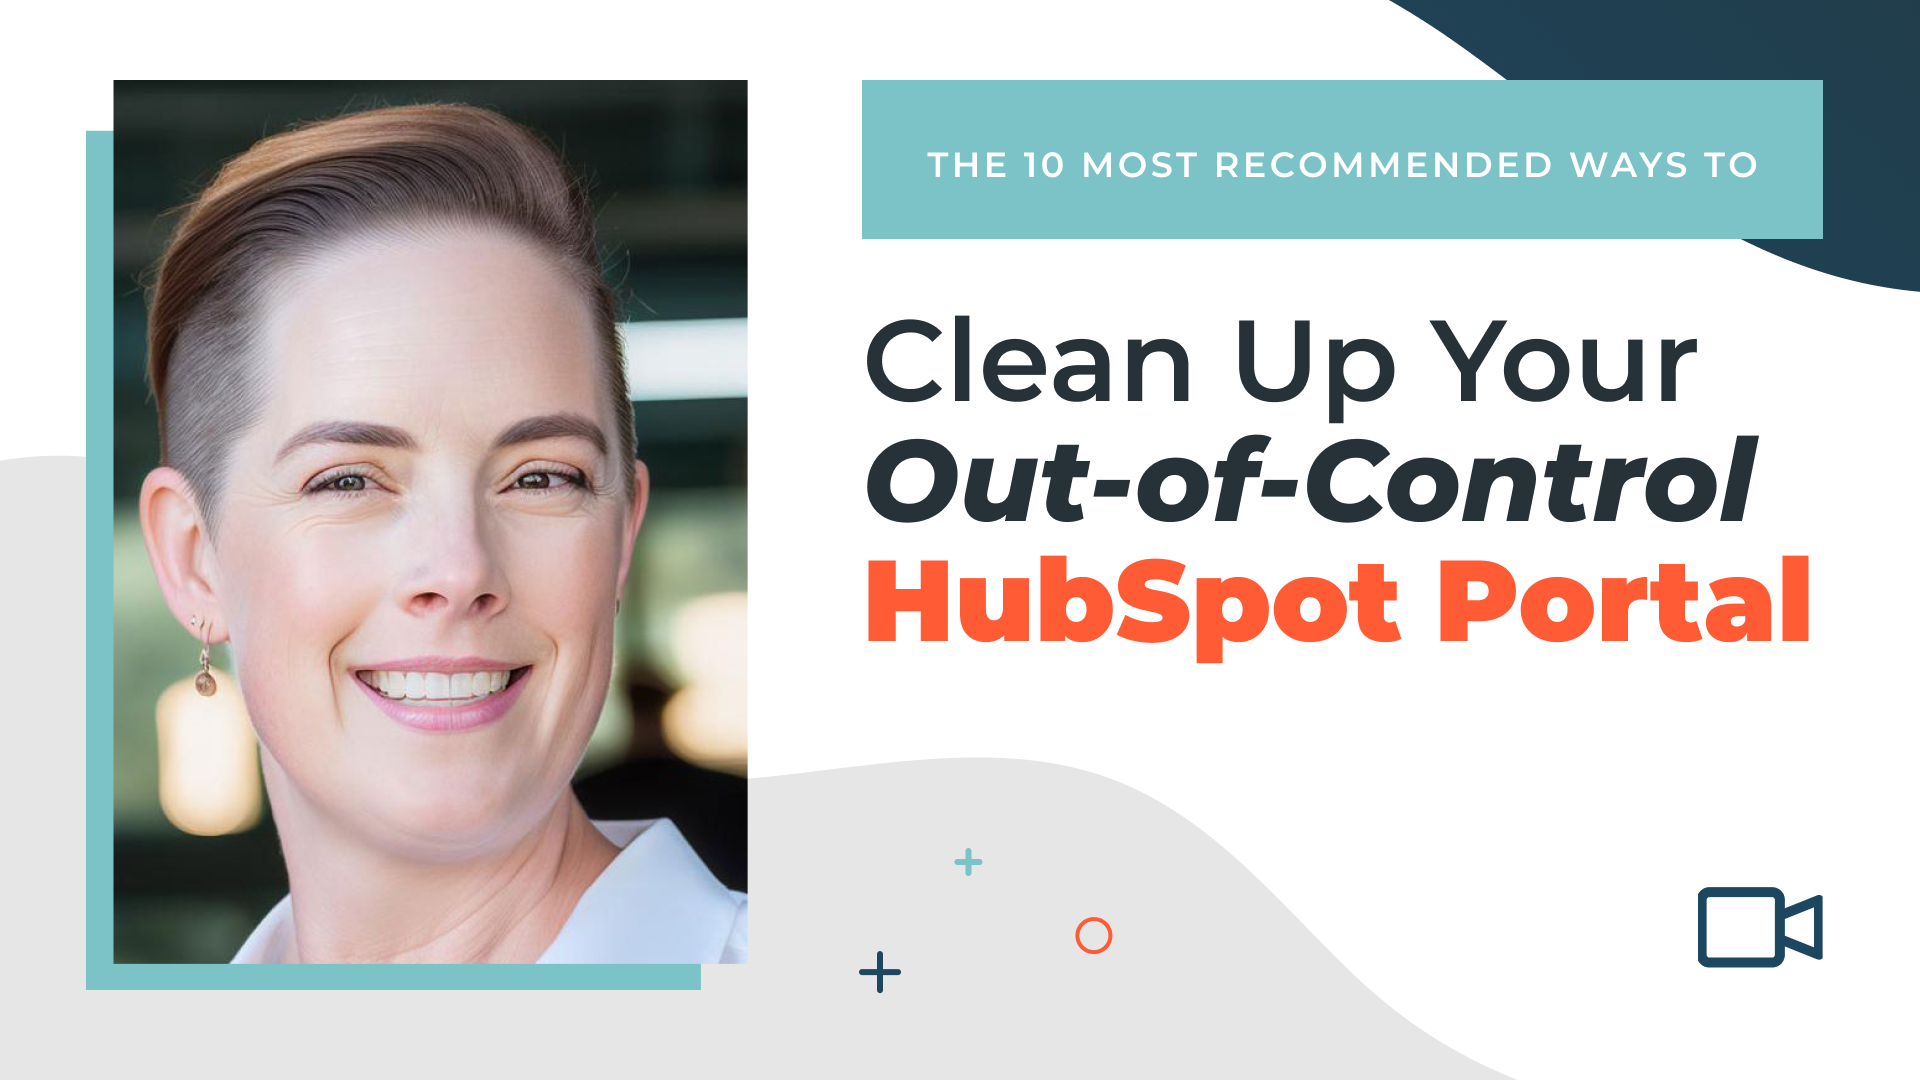 The 10 Most Recommended Ways to Clean Up Your Out-of-Control HubSpot Portal!